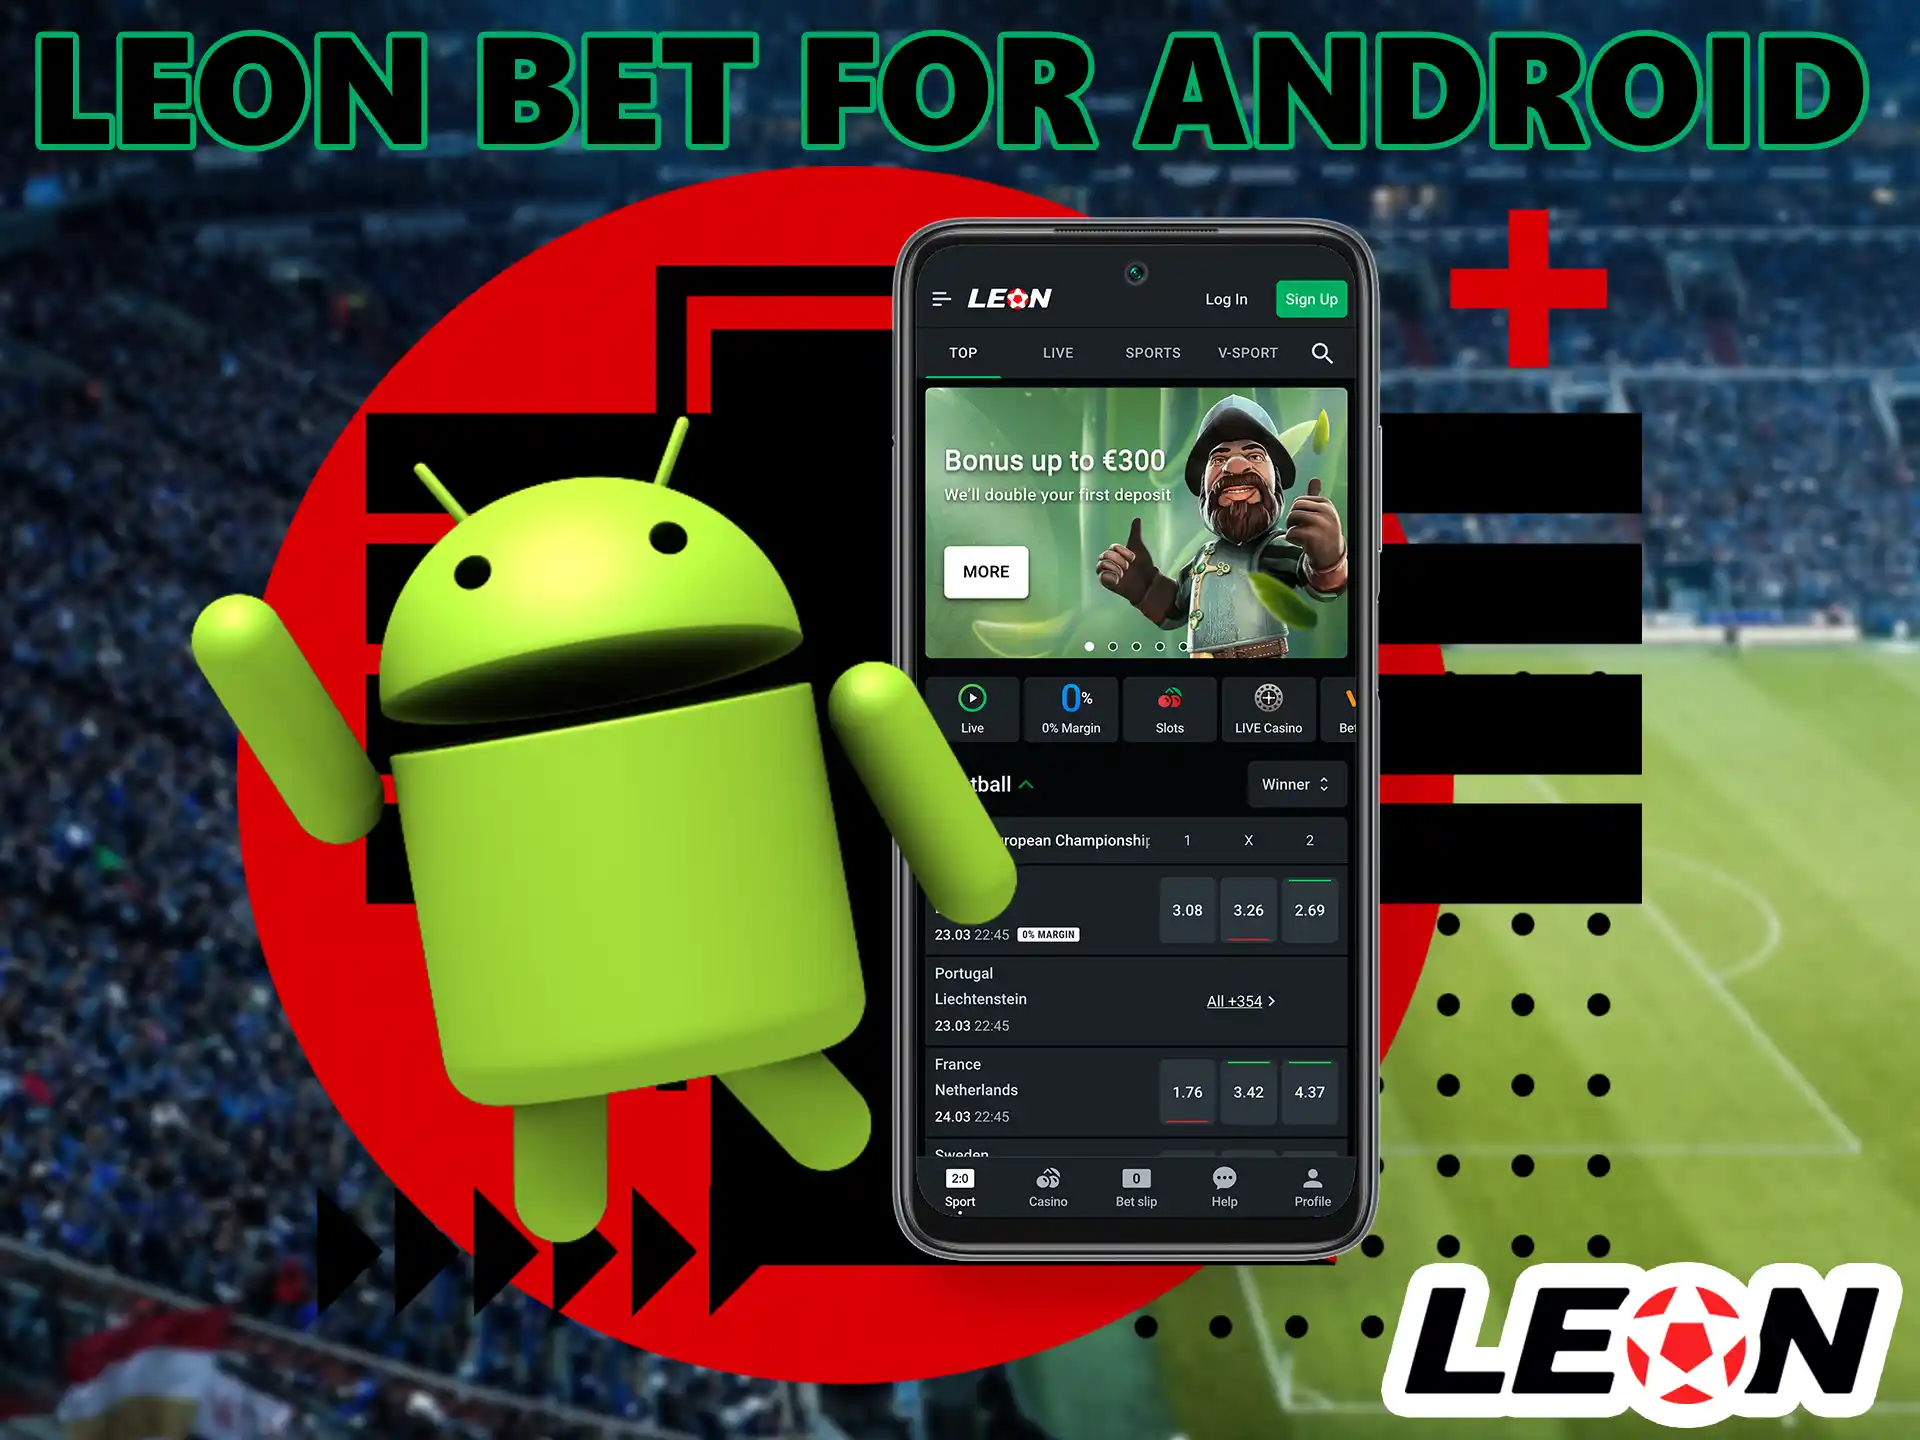 Leon Bet's software provides a superior gaming experience, saving traffic by making betting mobile wherever it is convenient for the customer.